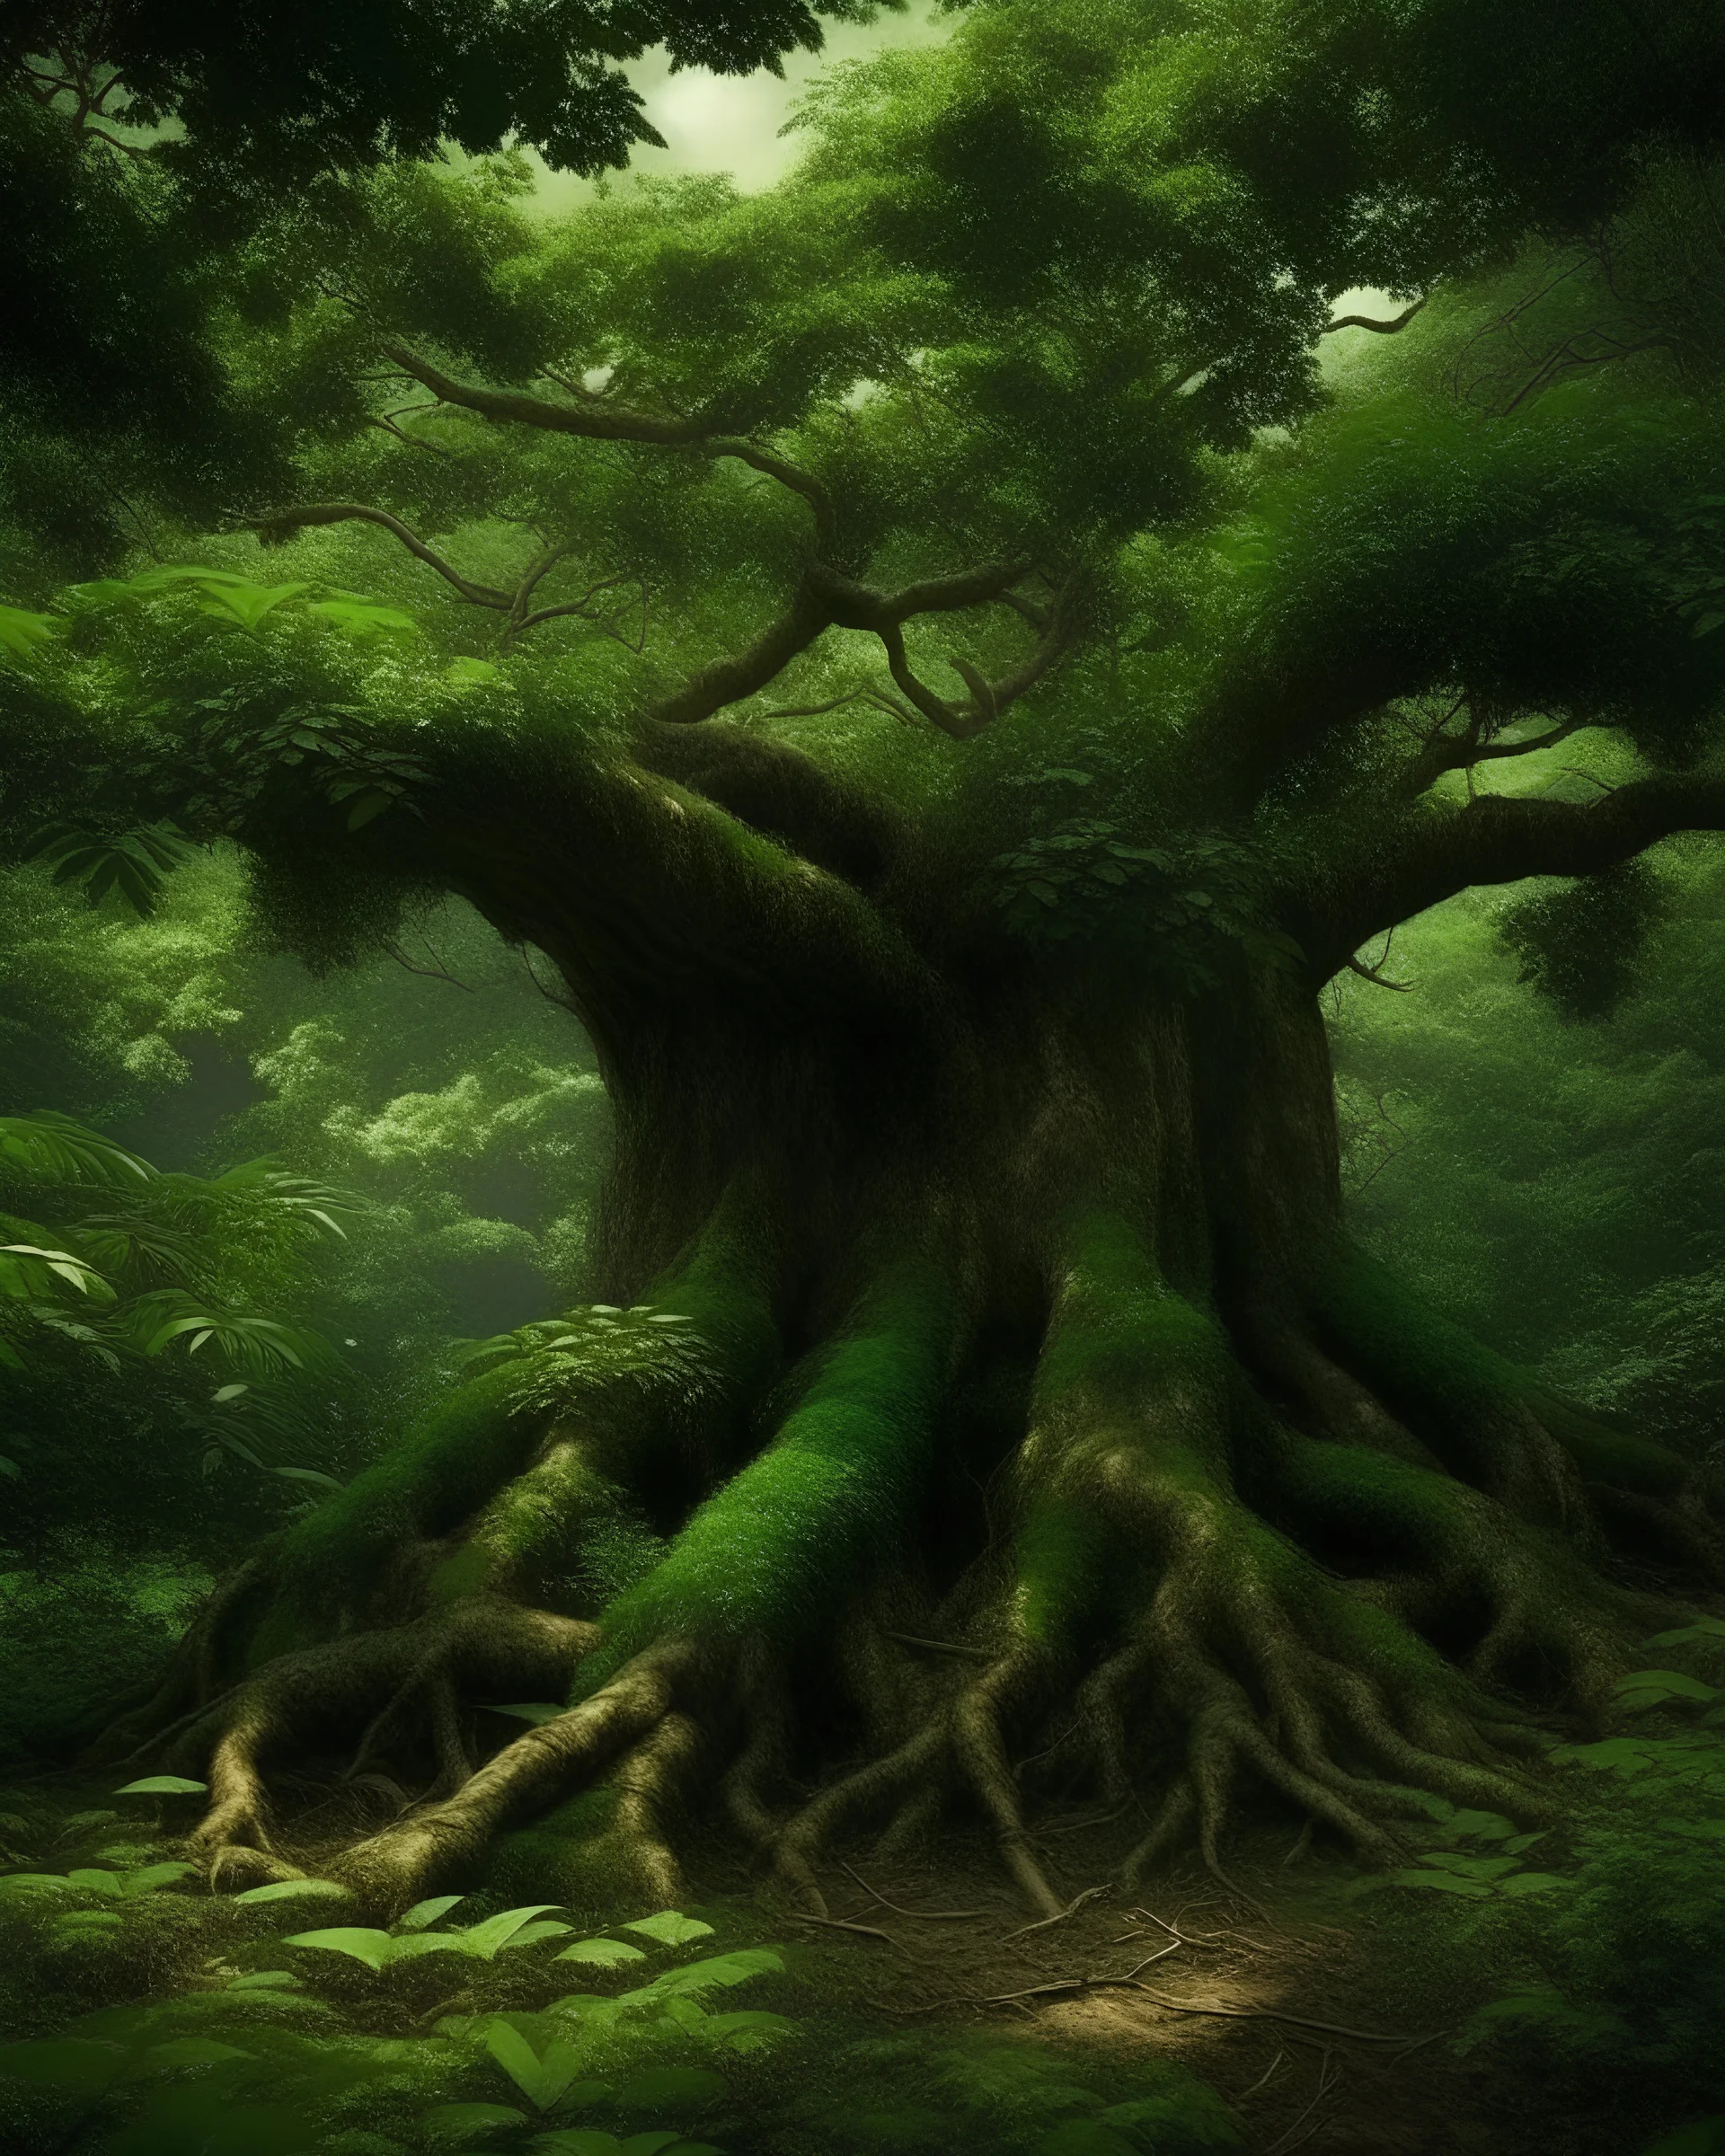 An old and beautiful tree in a green jungle